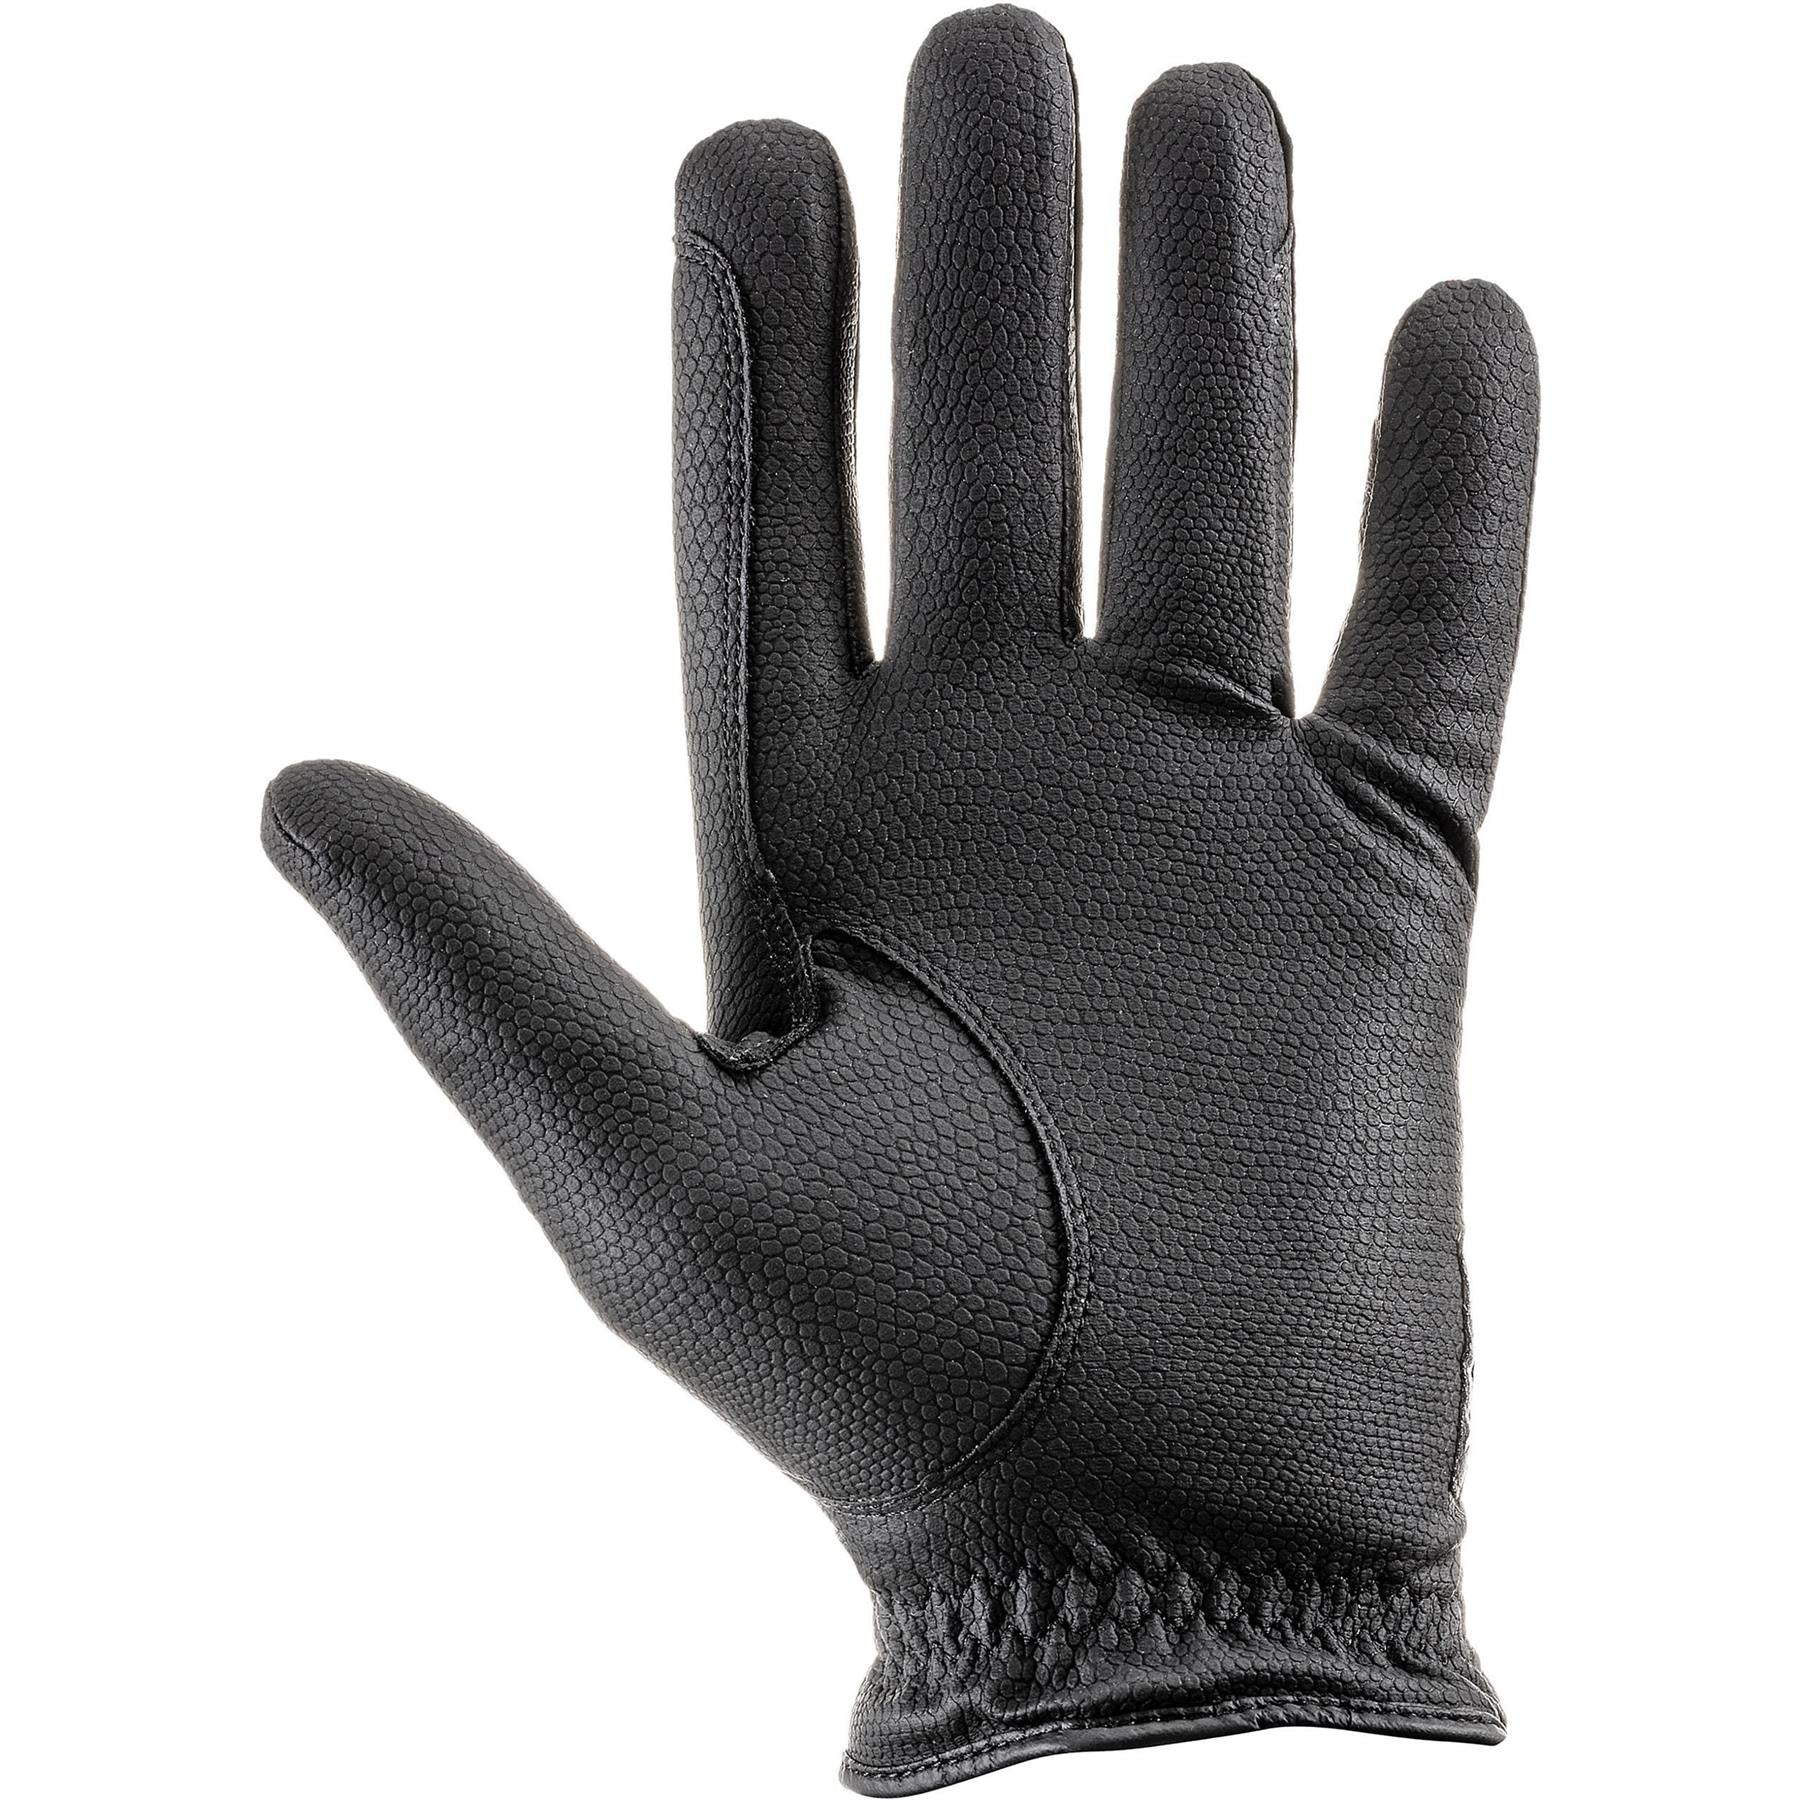 Uvex Sportstyle Winter Horse Riding Gloves - Just Horse Riders